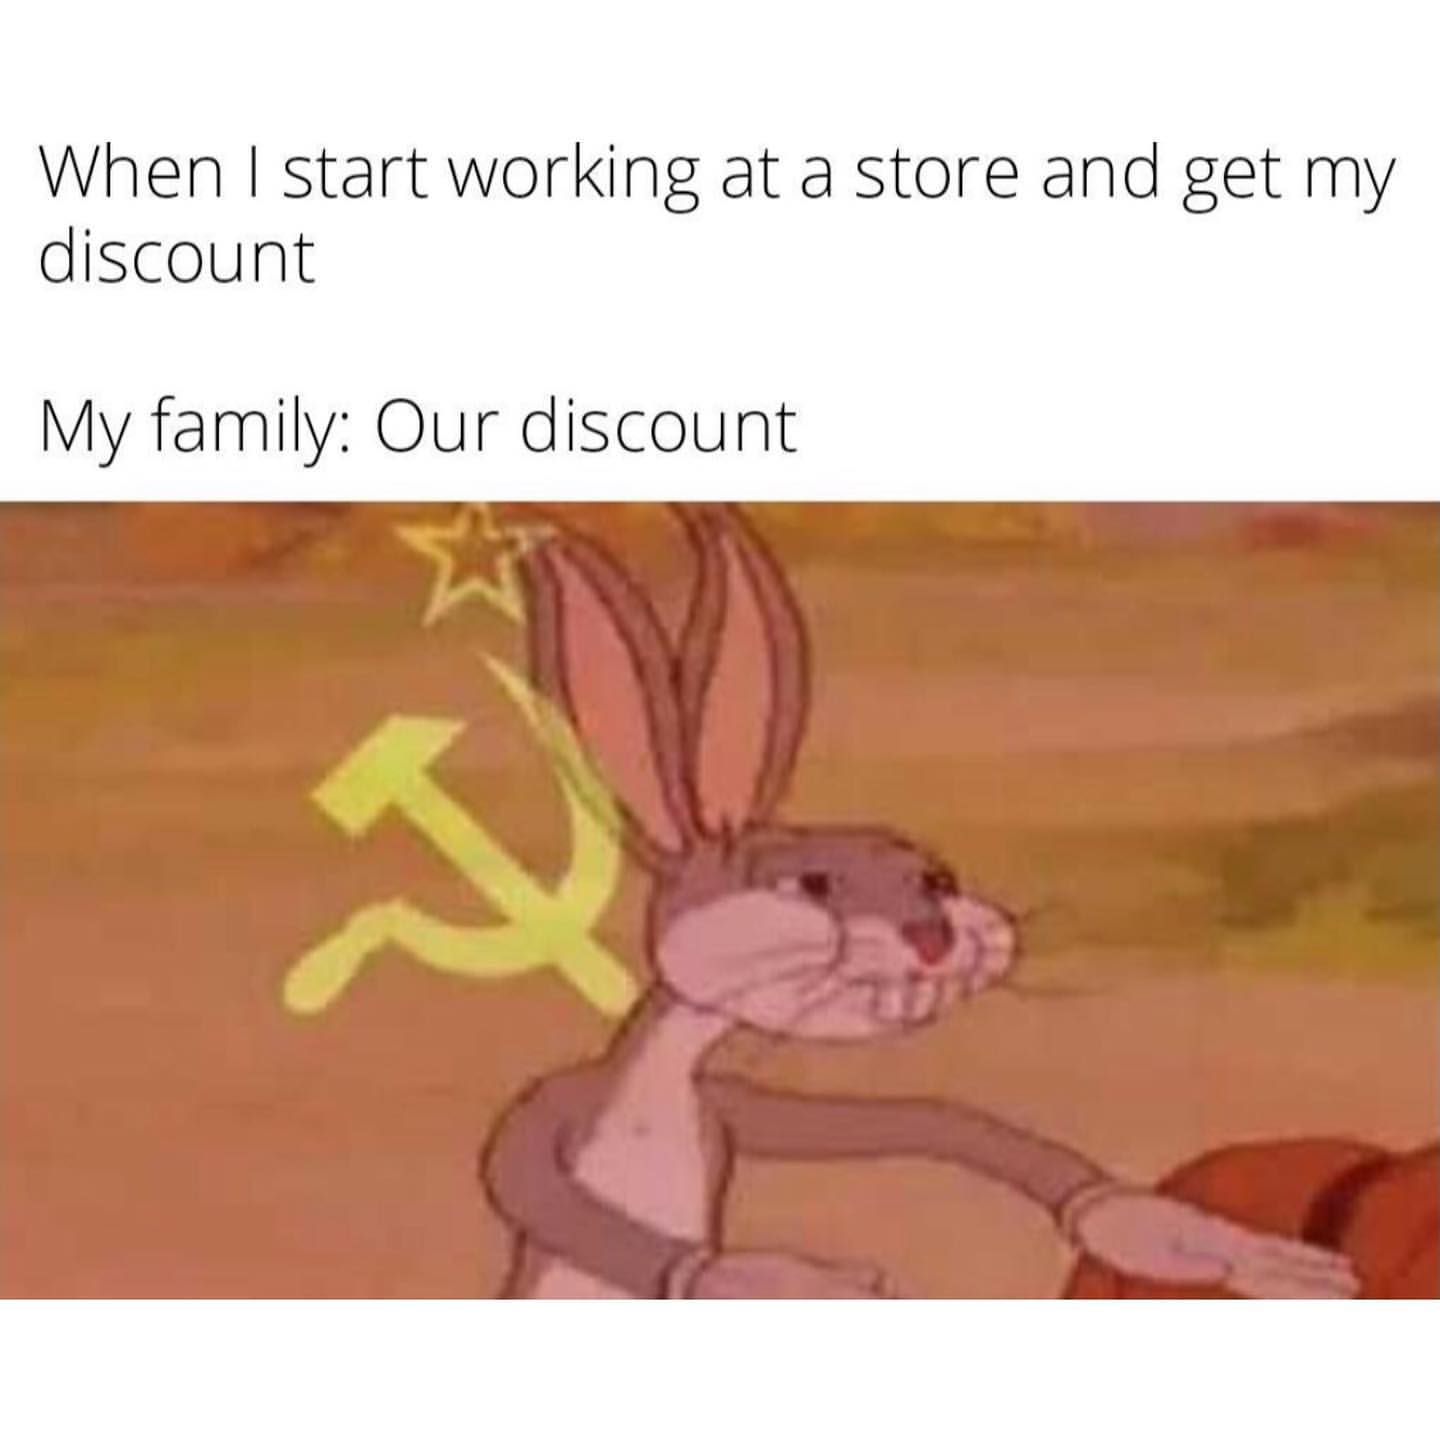 When I start working at a store and get my discount. My family: Our discount.